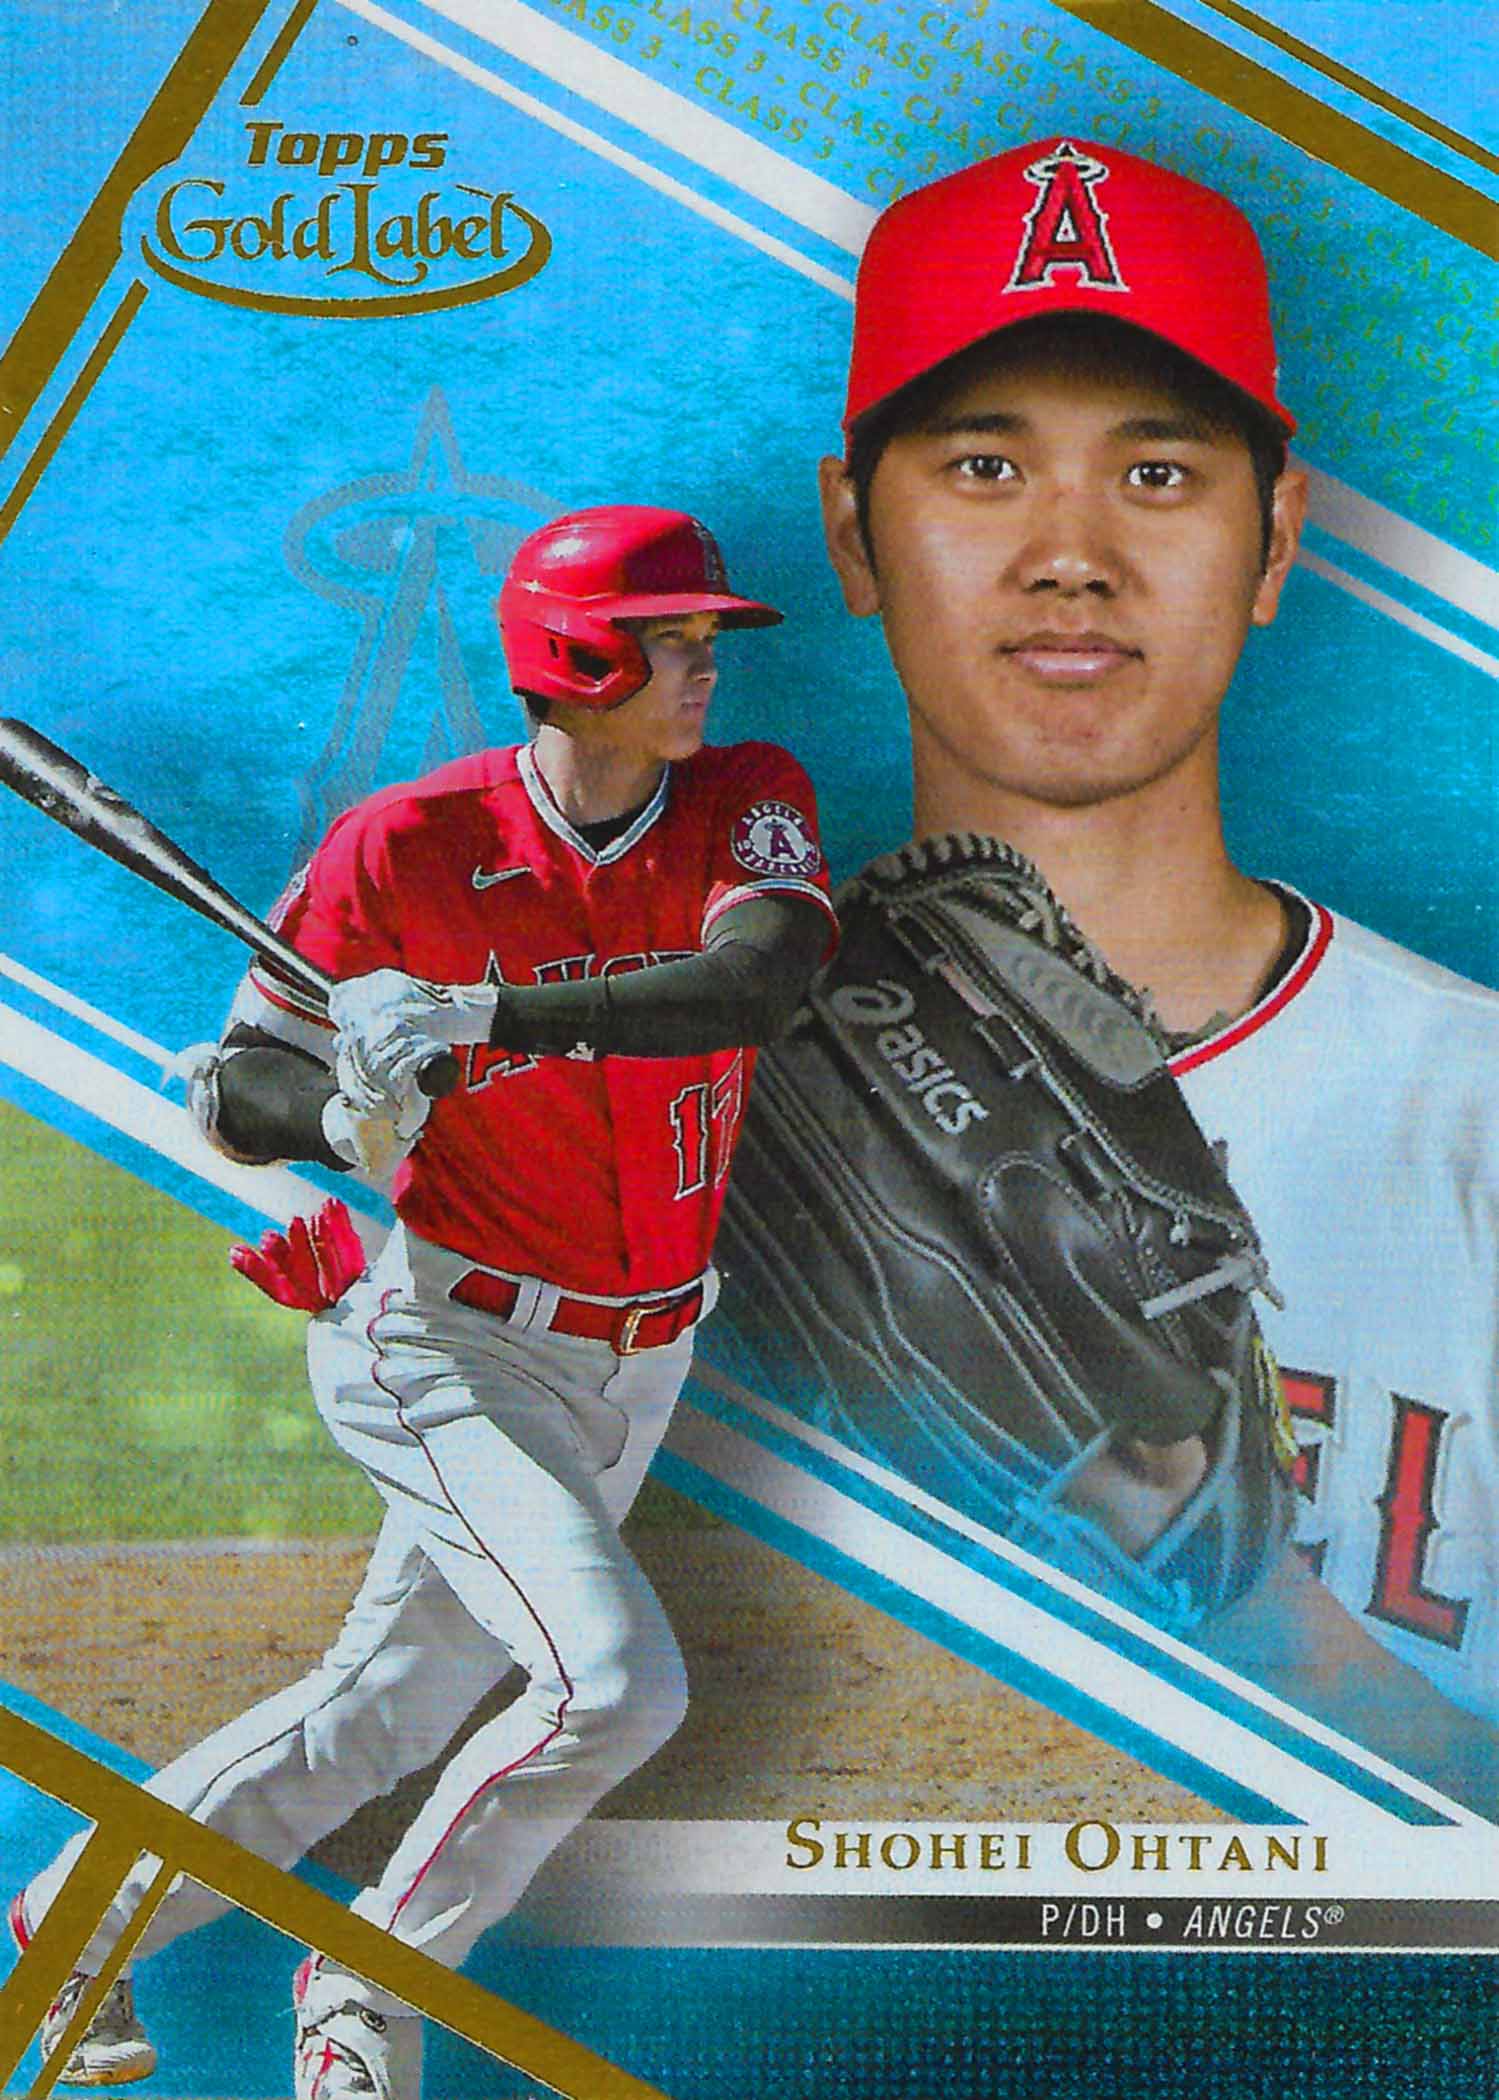 2021 Topps Gold Label Class 3